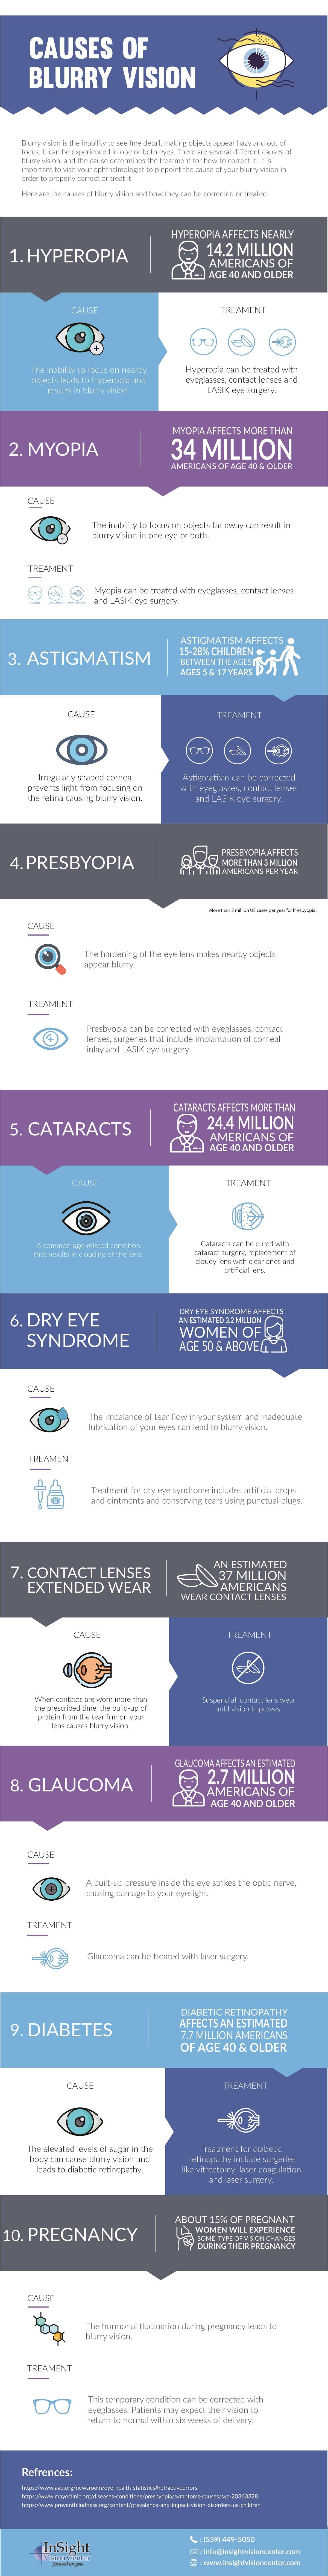 Causes of Blurry Vision #infographic